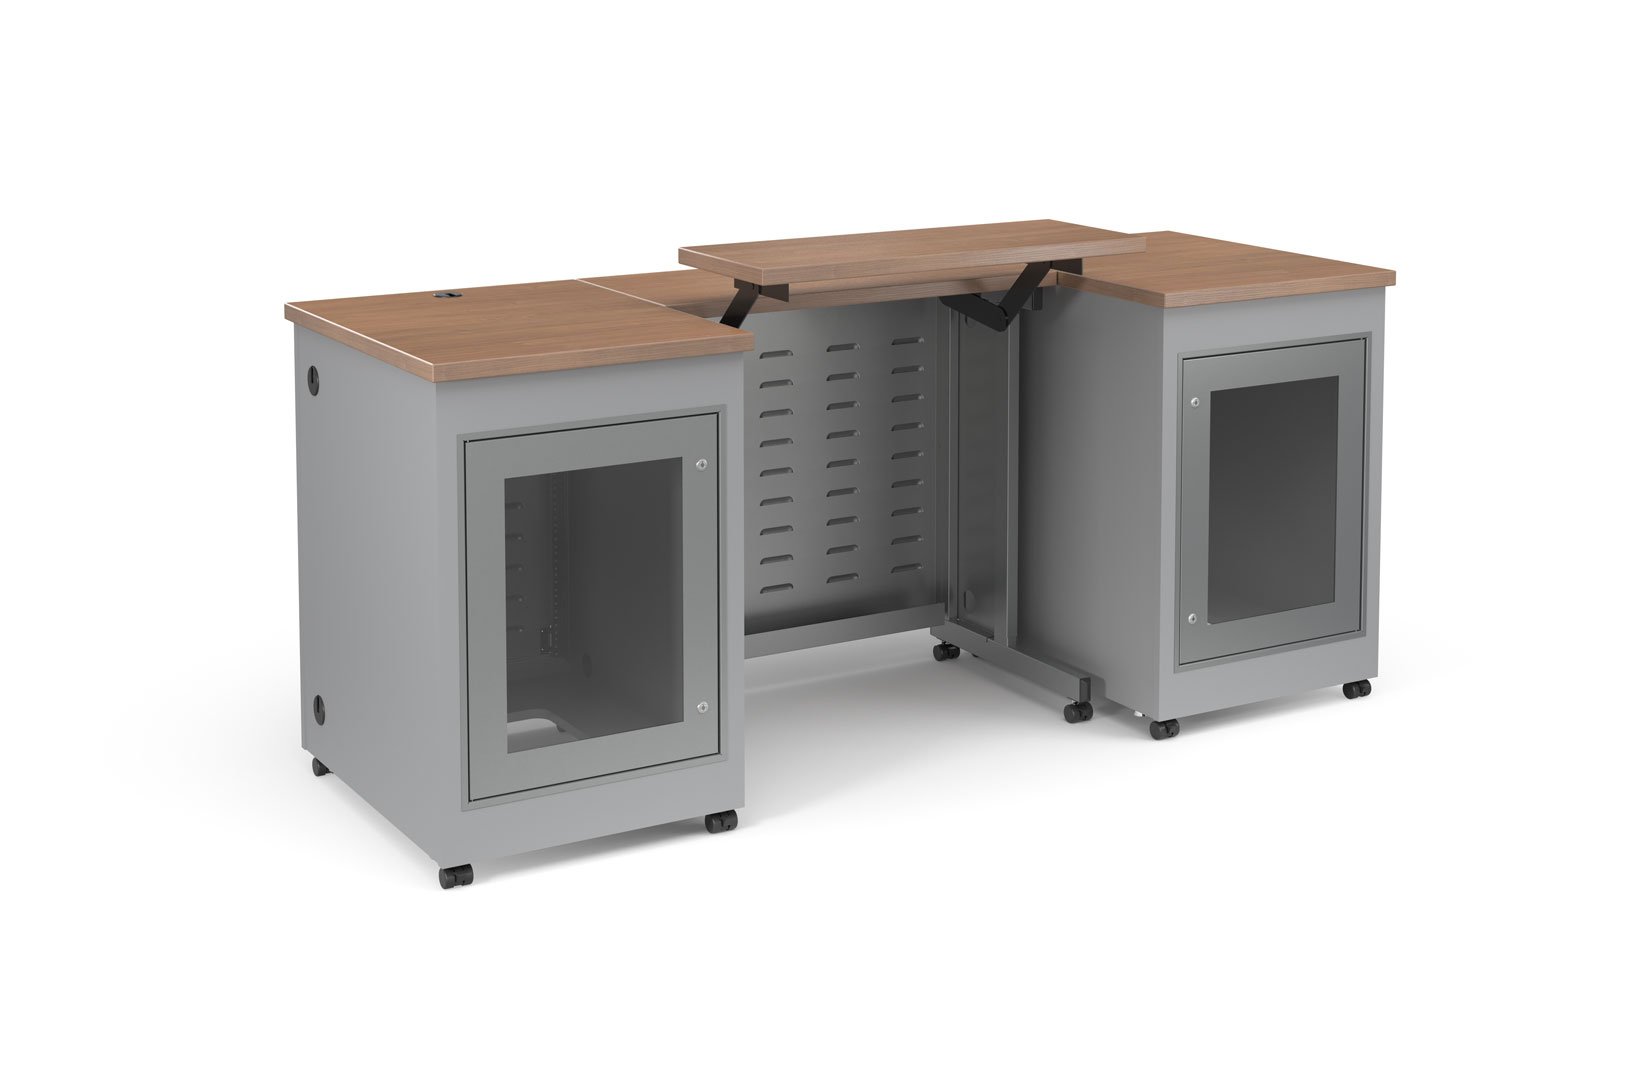 2022-08-18_Configurable_IT_Table_Lectern_and_Cabinets_Front_1.jpg